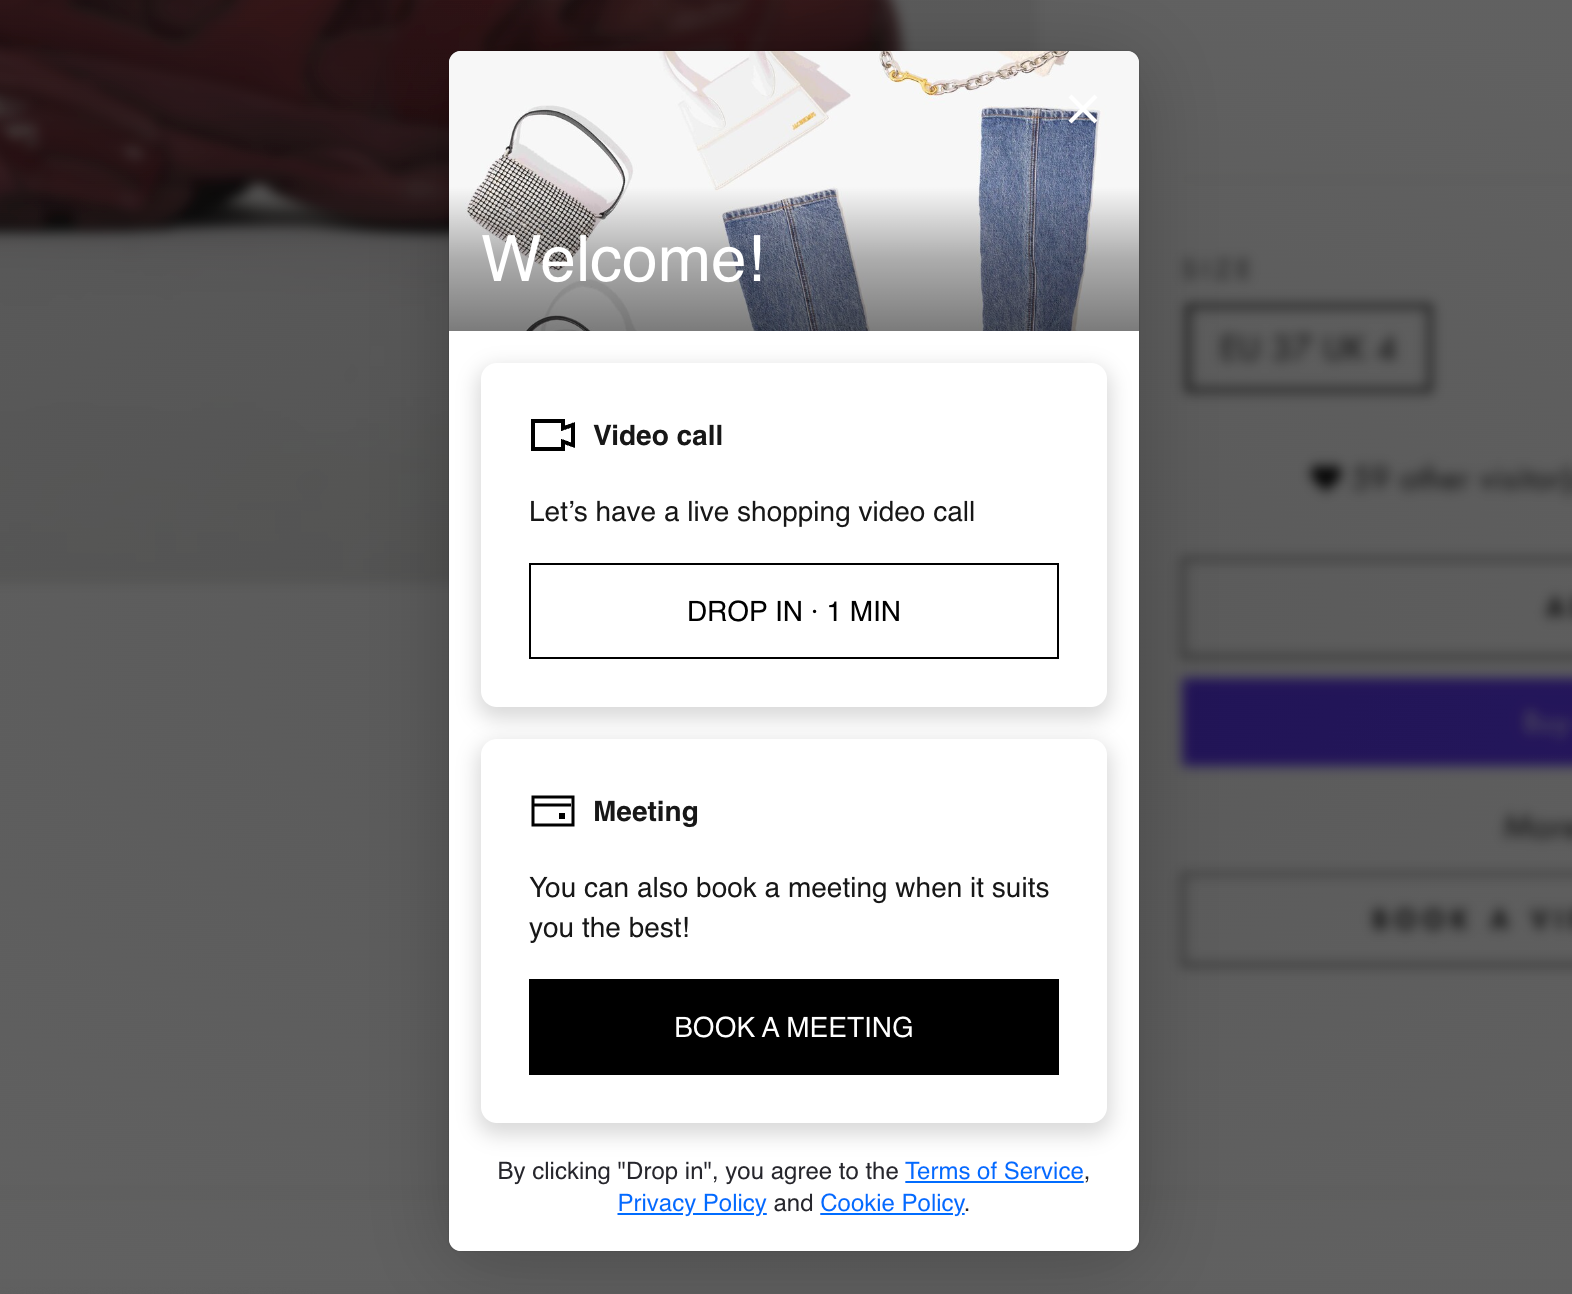 Popup box showing options to book a live shopping video call or a meeting.